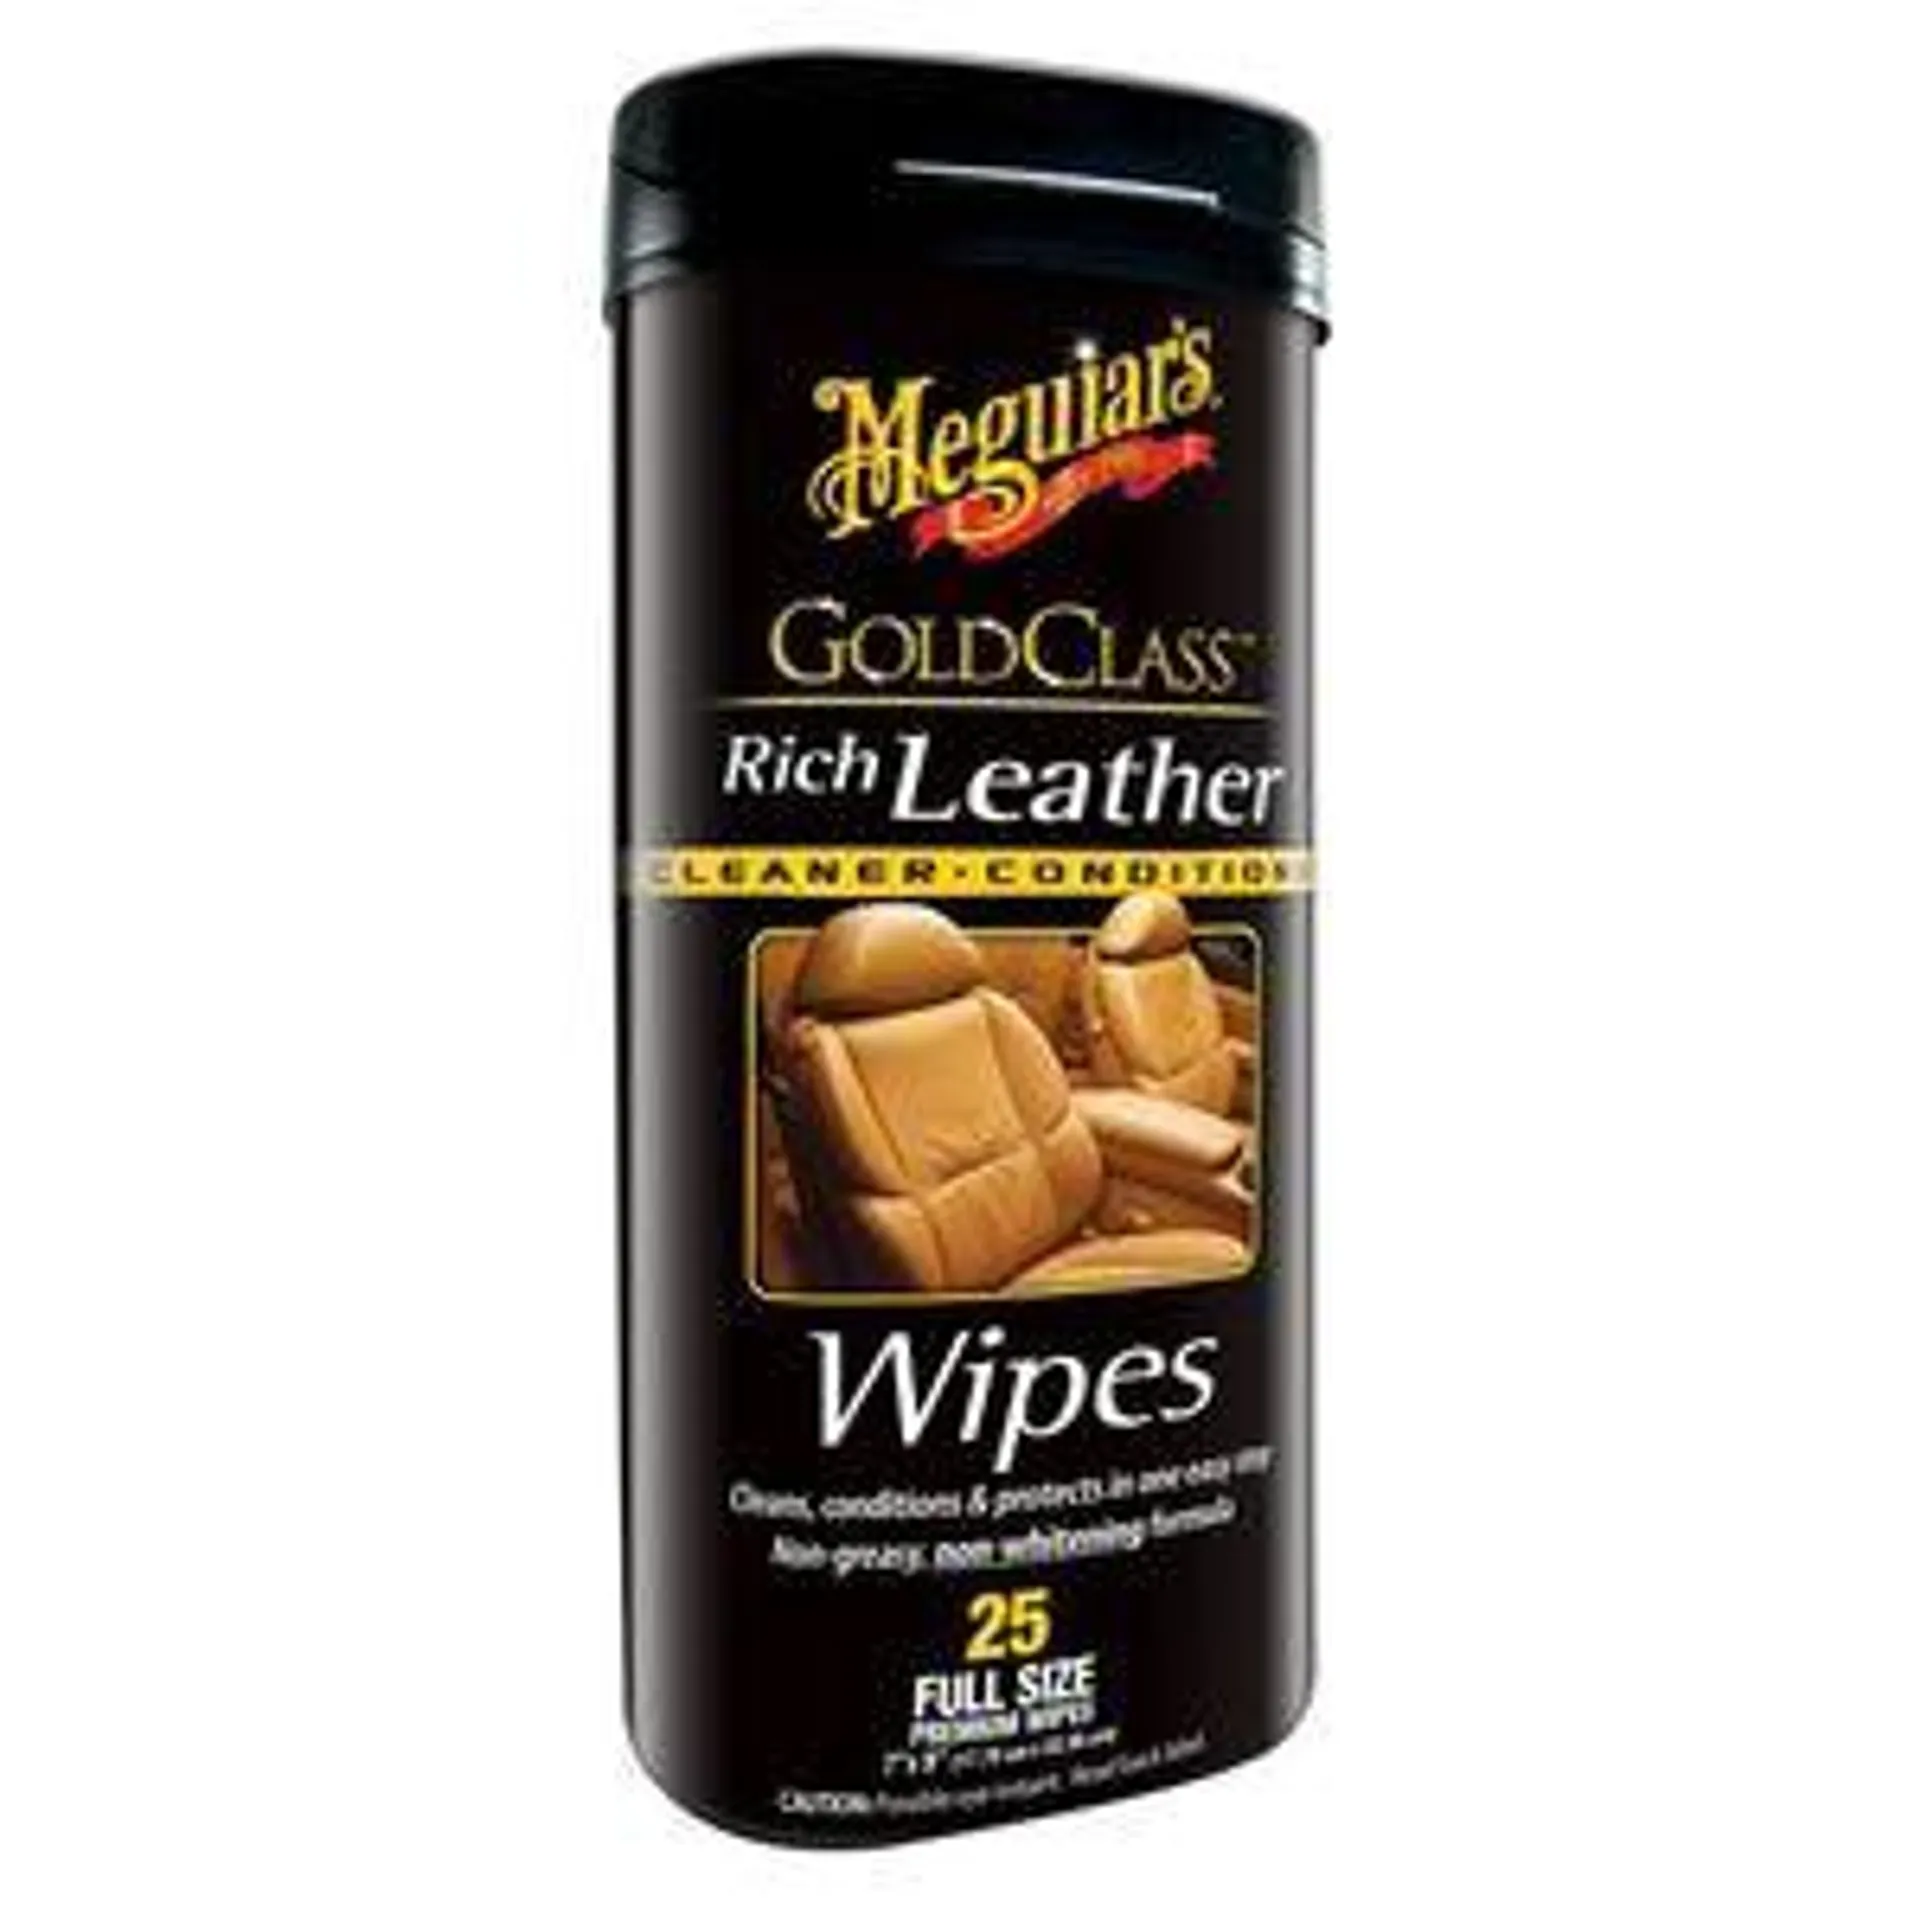 Meguiar's Gold Class Rich Leather Cleaner and Conditioner Wipes 25 Count